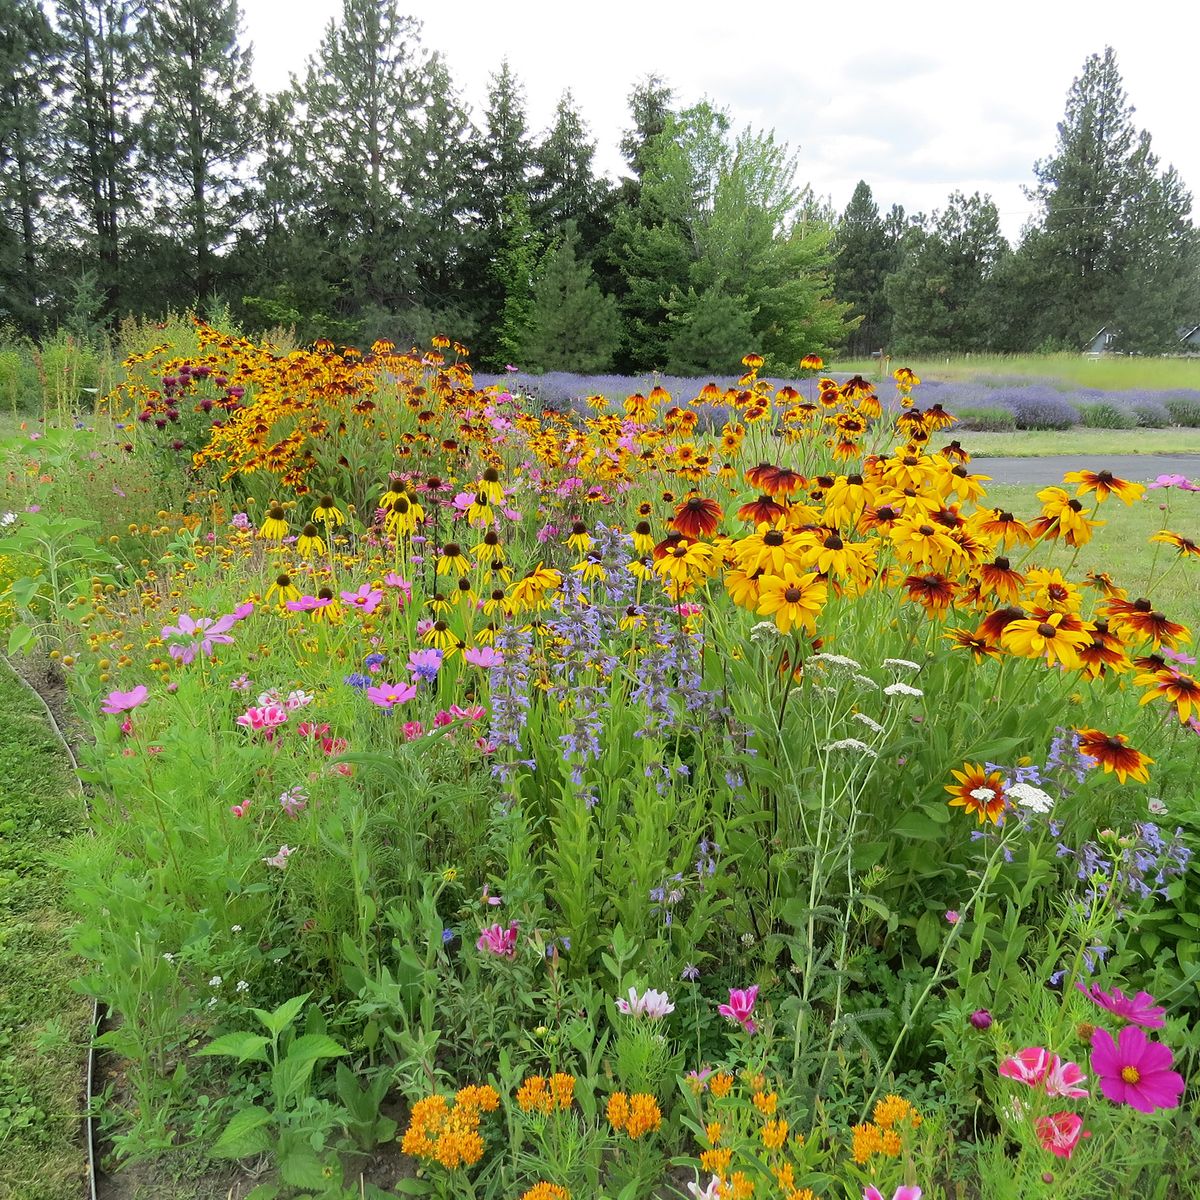 Pollinator gardens provide pollen, nectar and habitat for beneficial insects and pollinators. It’s important to plant diverse types of flowers for seasonlong bloom.  (Susan Mulvihill/For The Spokesman-Review)